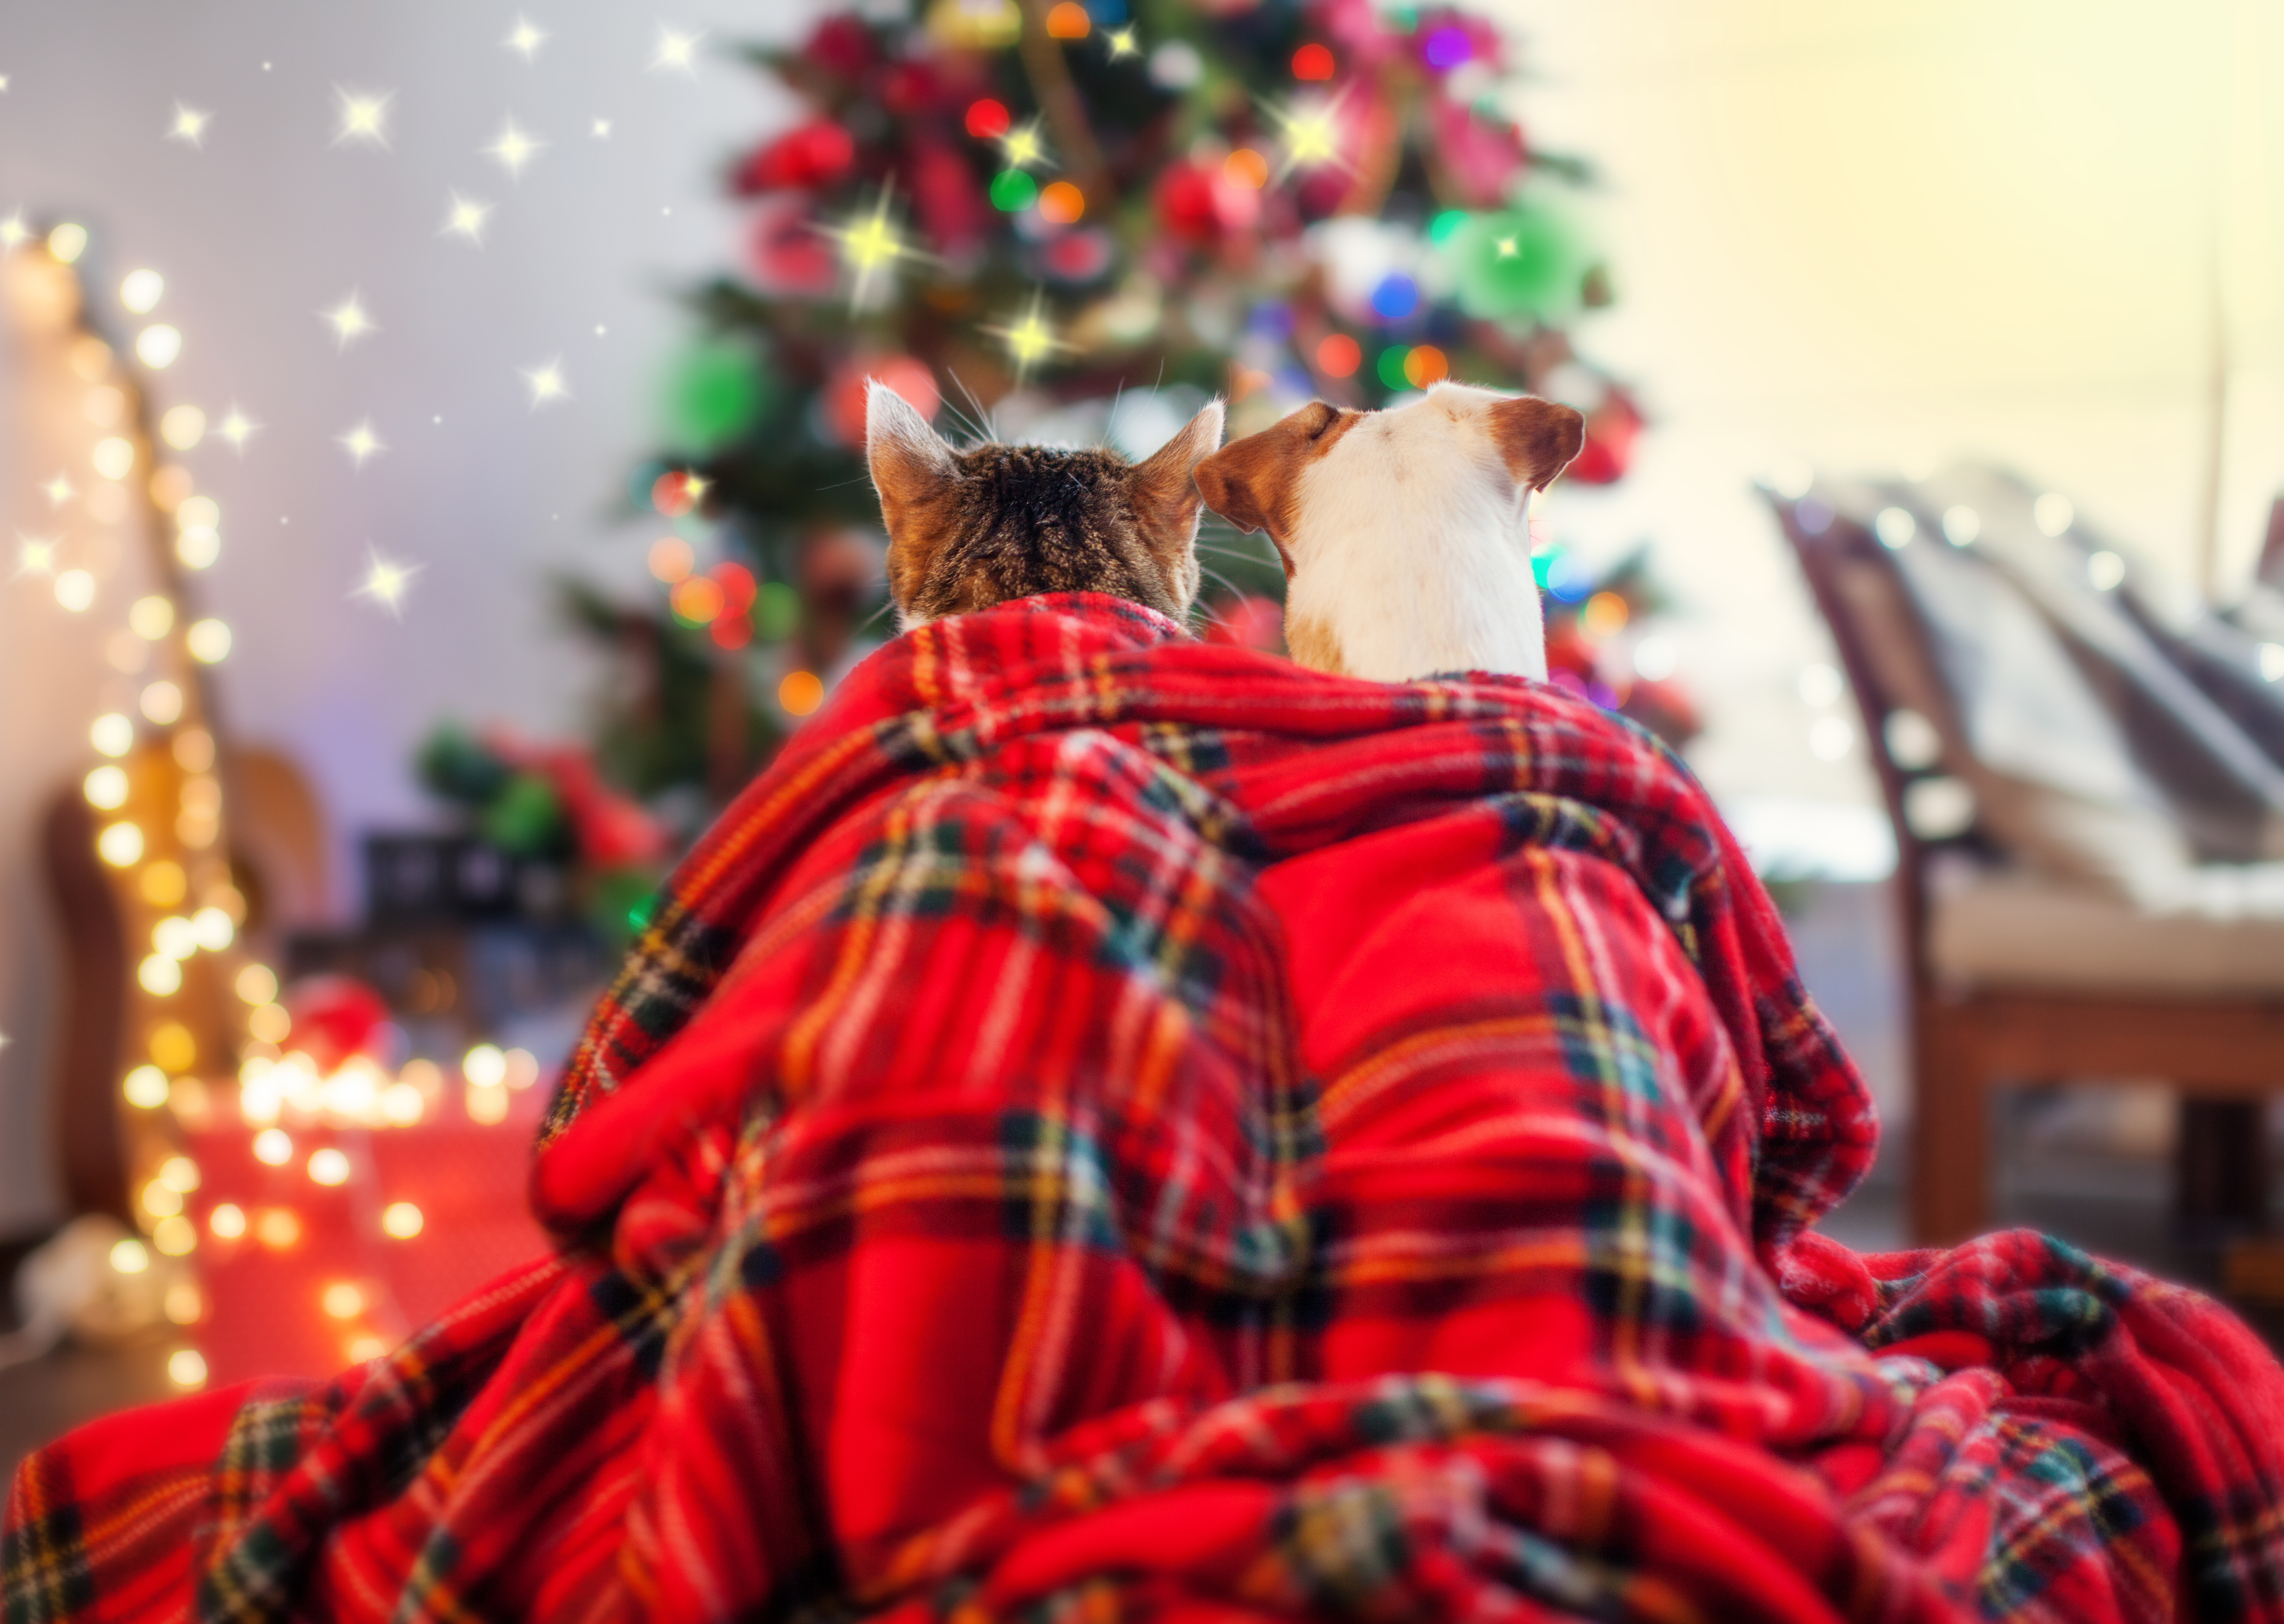 This Christmas Americans will buy more gifts for their pets than for their in-laws, according to a survey of holiday spending